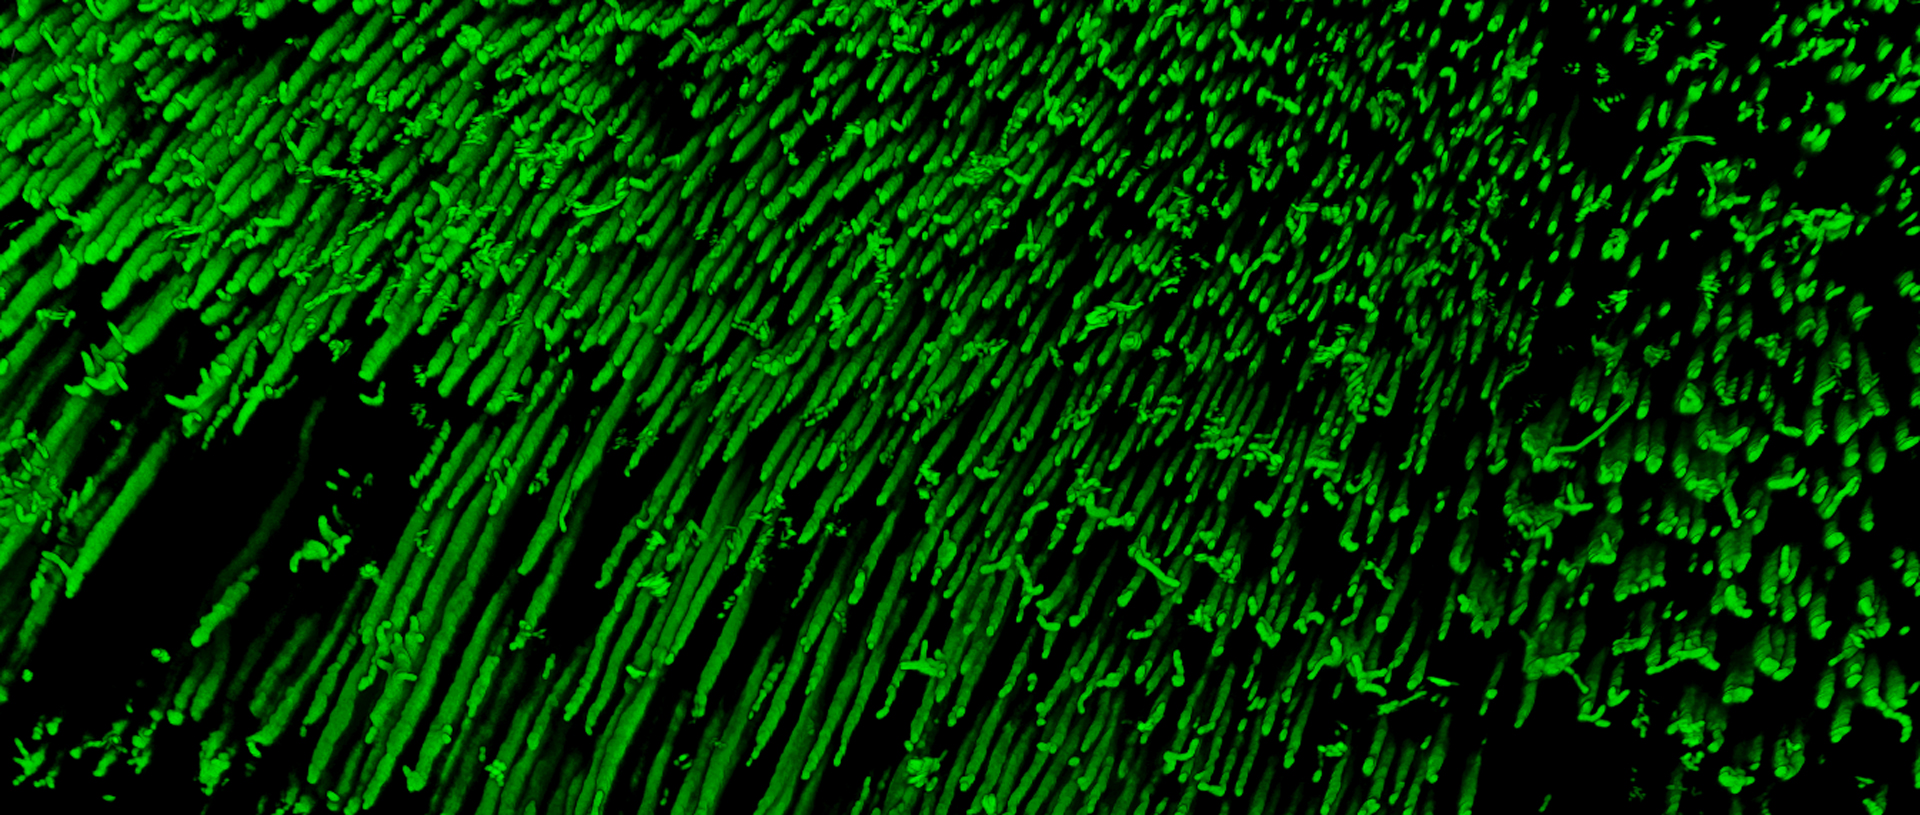 imaging of dentin slices shows many small repeating green strands